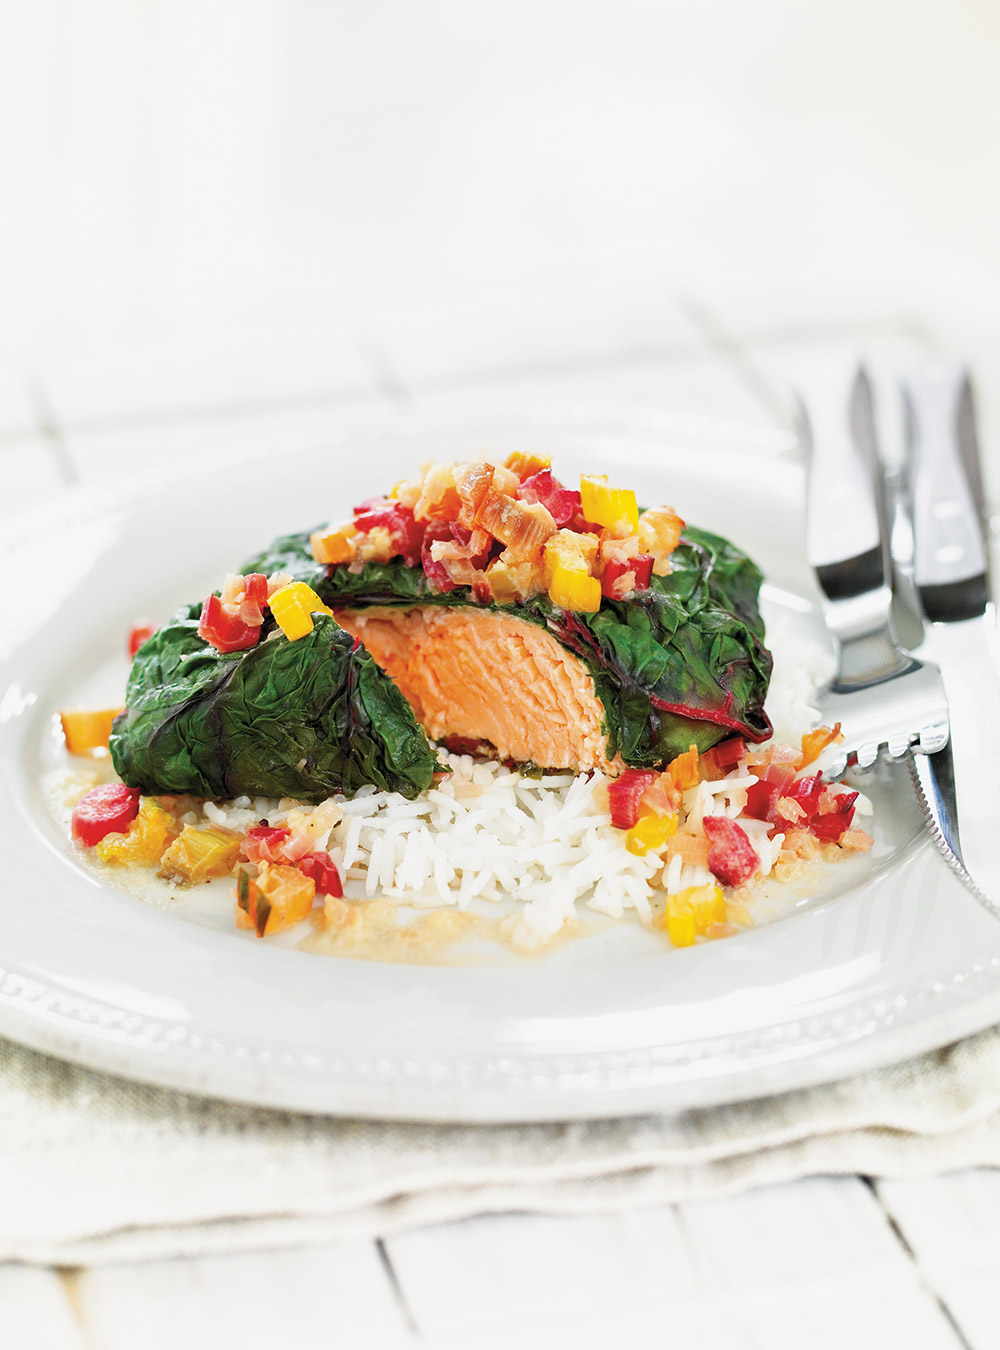 Salmon wrapped in Swiss Chard